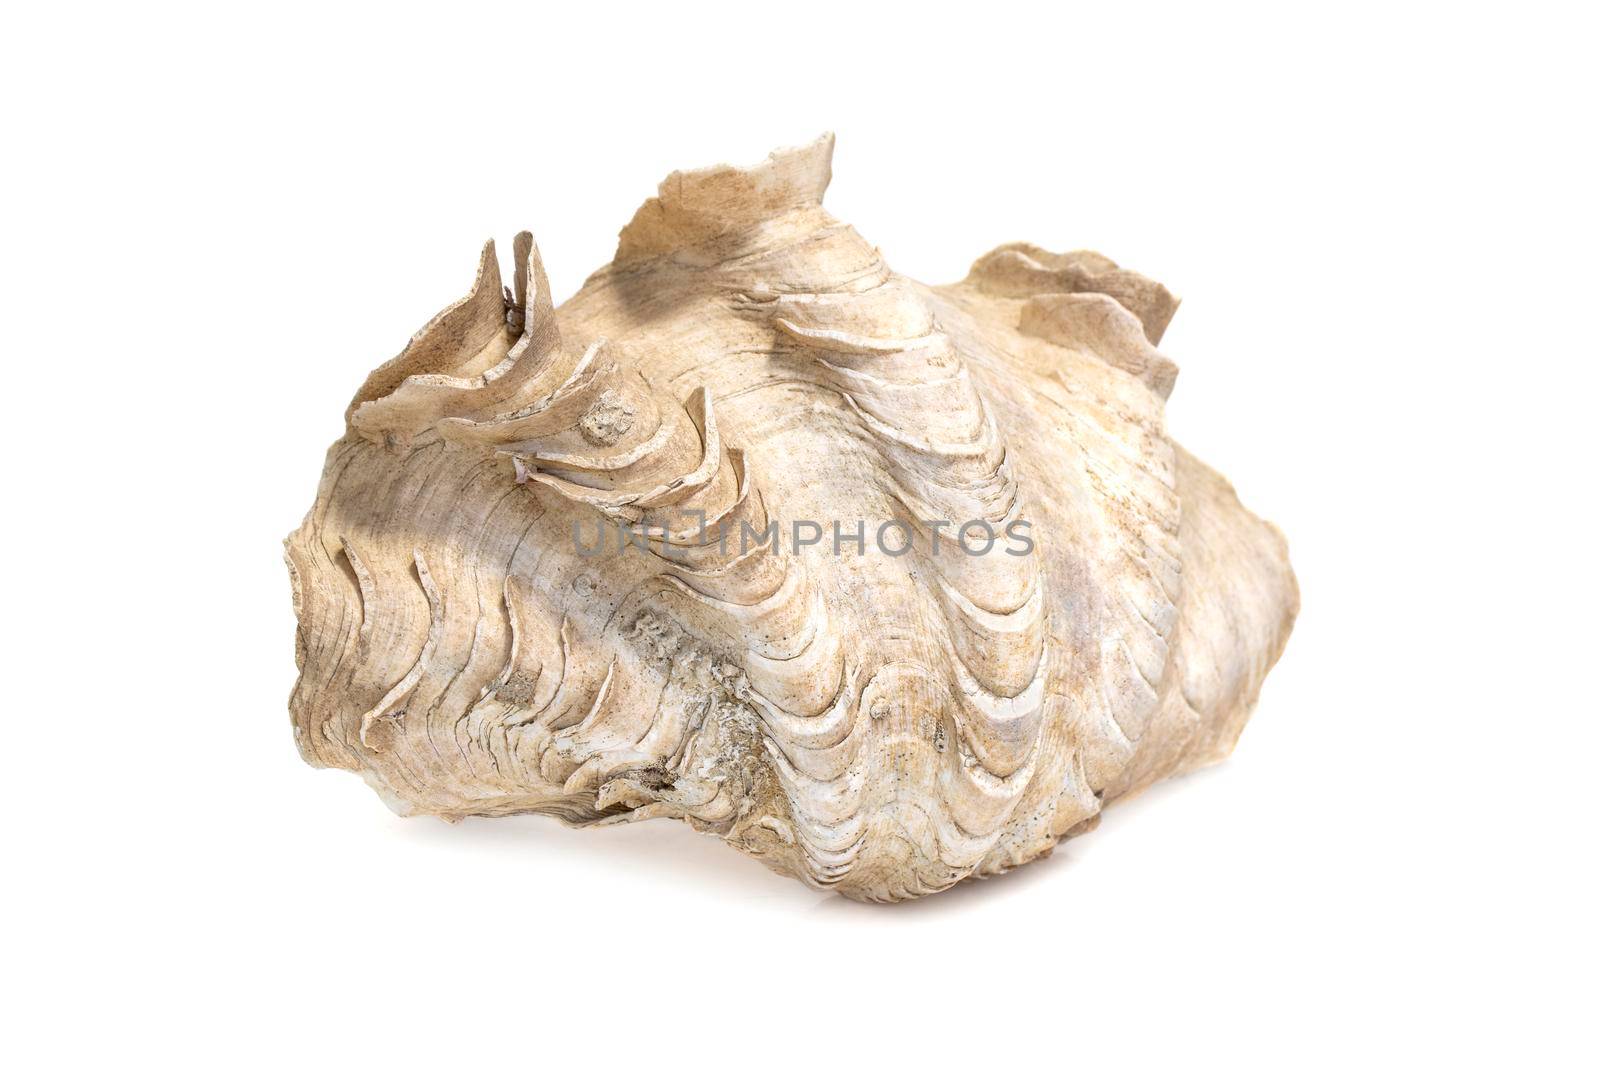 Image of Crocus Giant Clam (Tridacna crocea). on a white background. Sea shells. Undersea Animals. by yod67